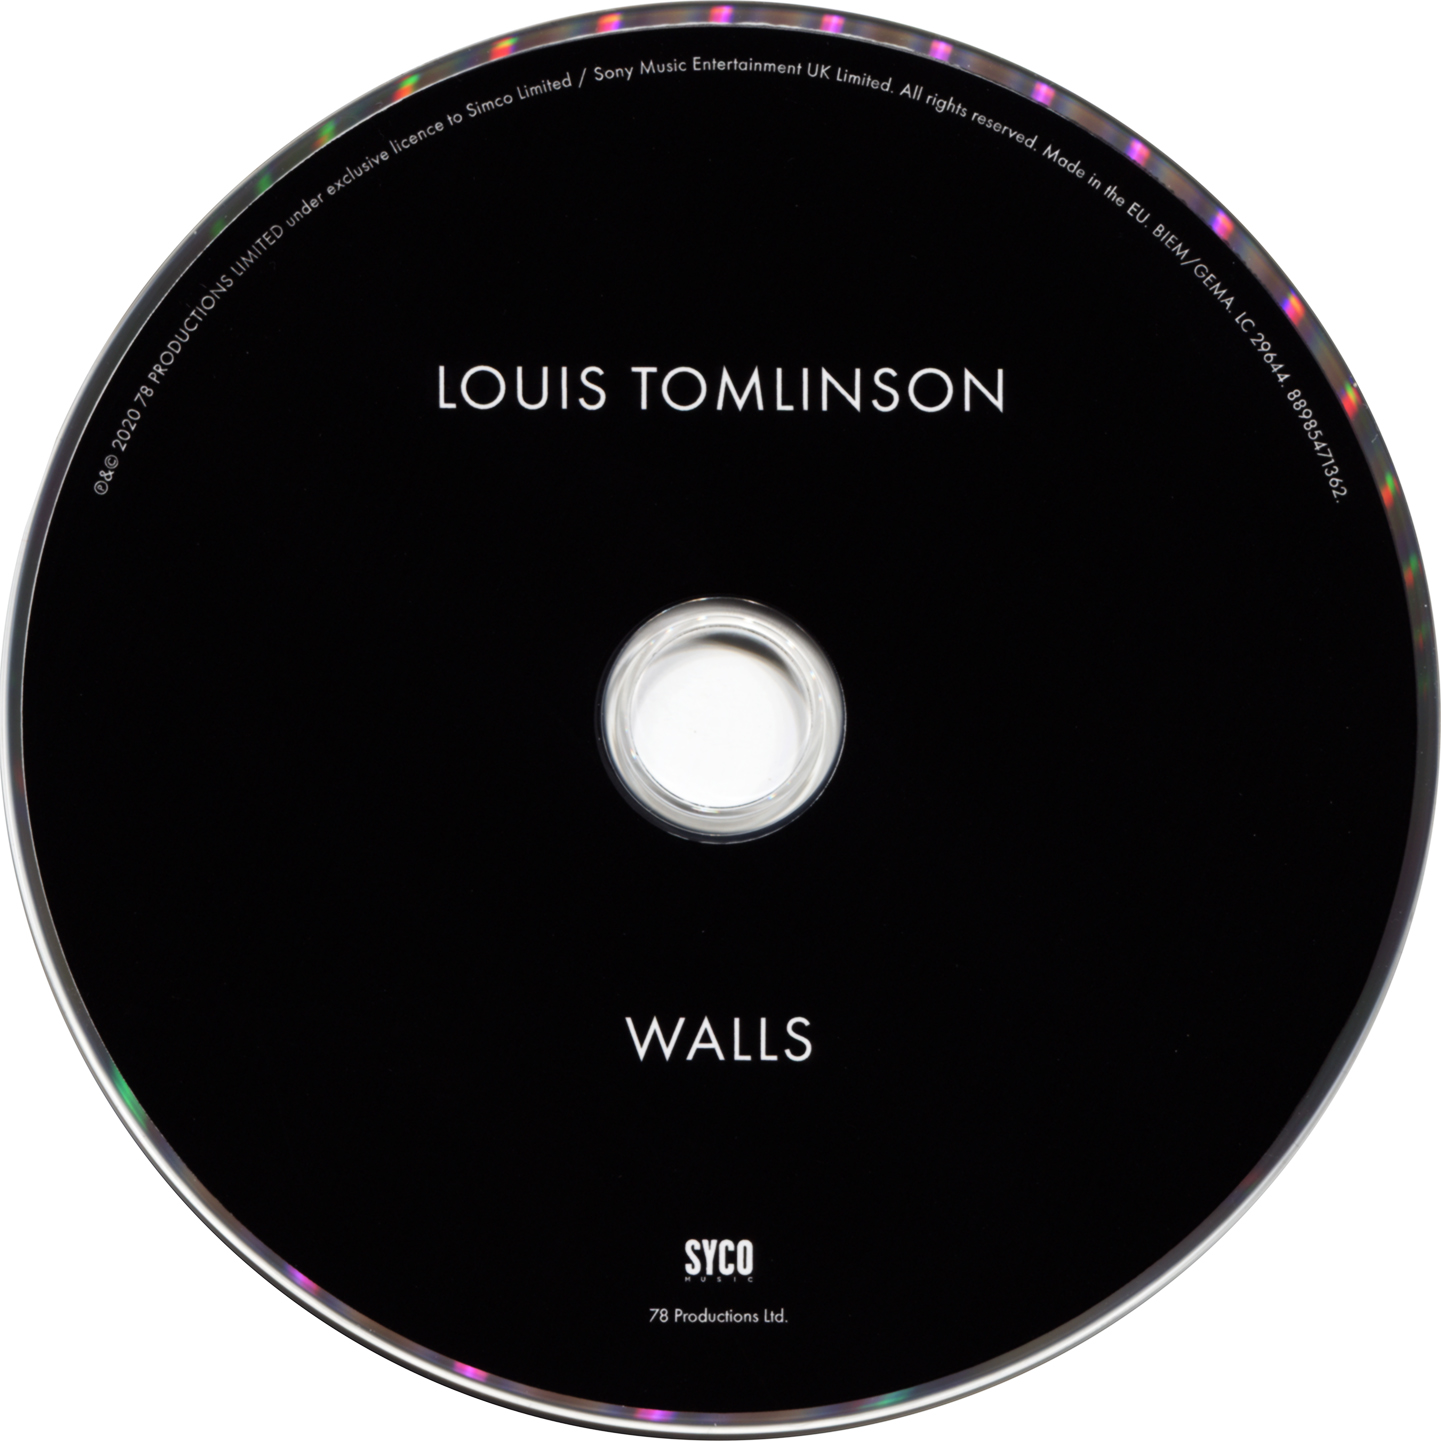 Release “Walls” by Louis Tomlinson - Cover Art - MusicBrainz